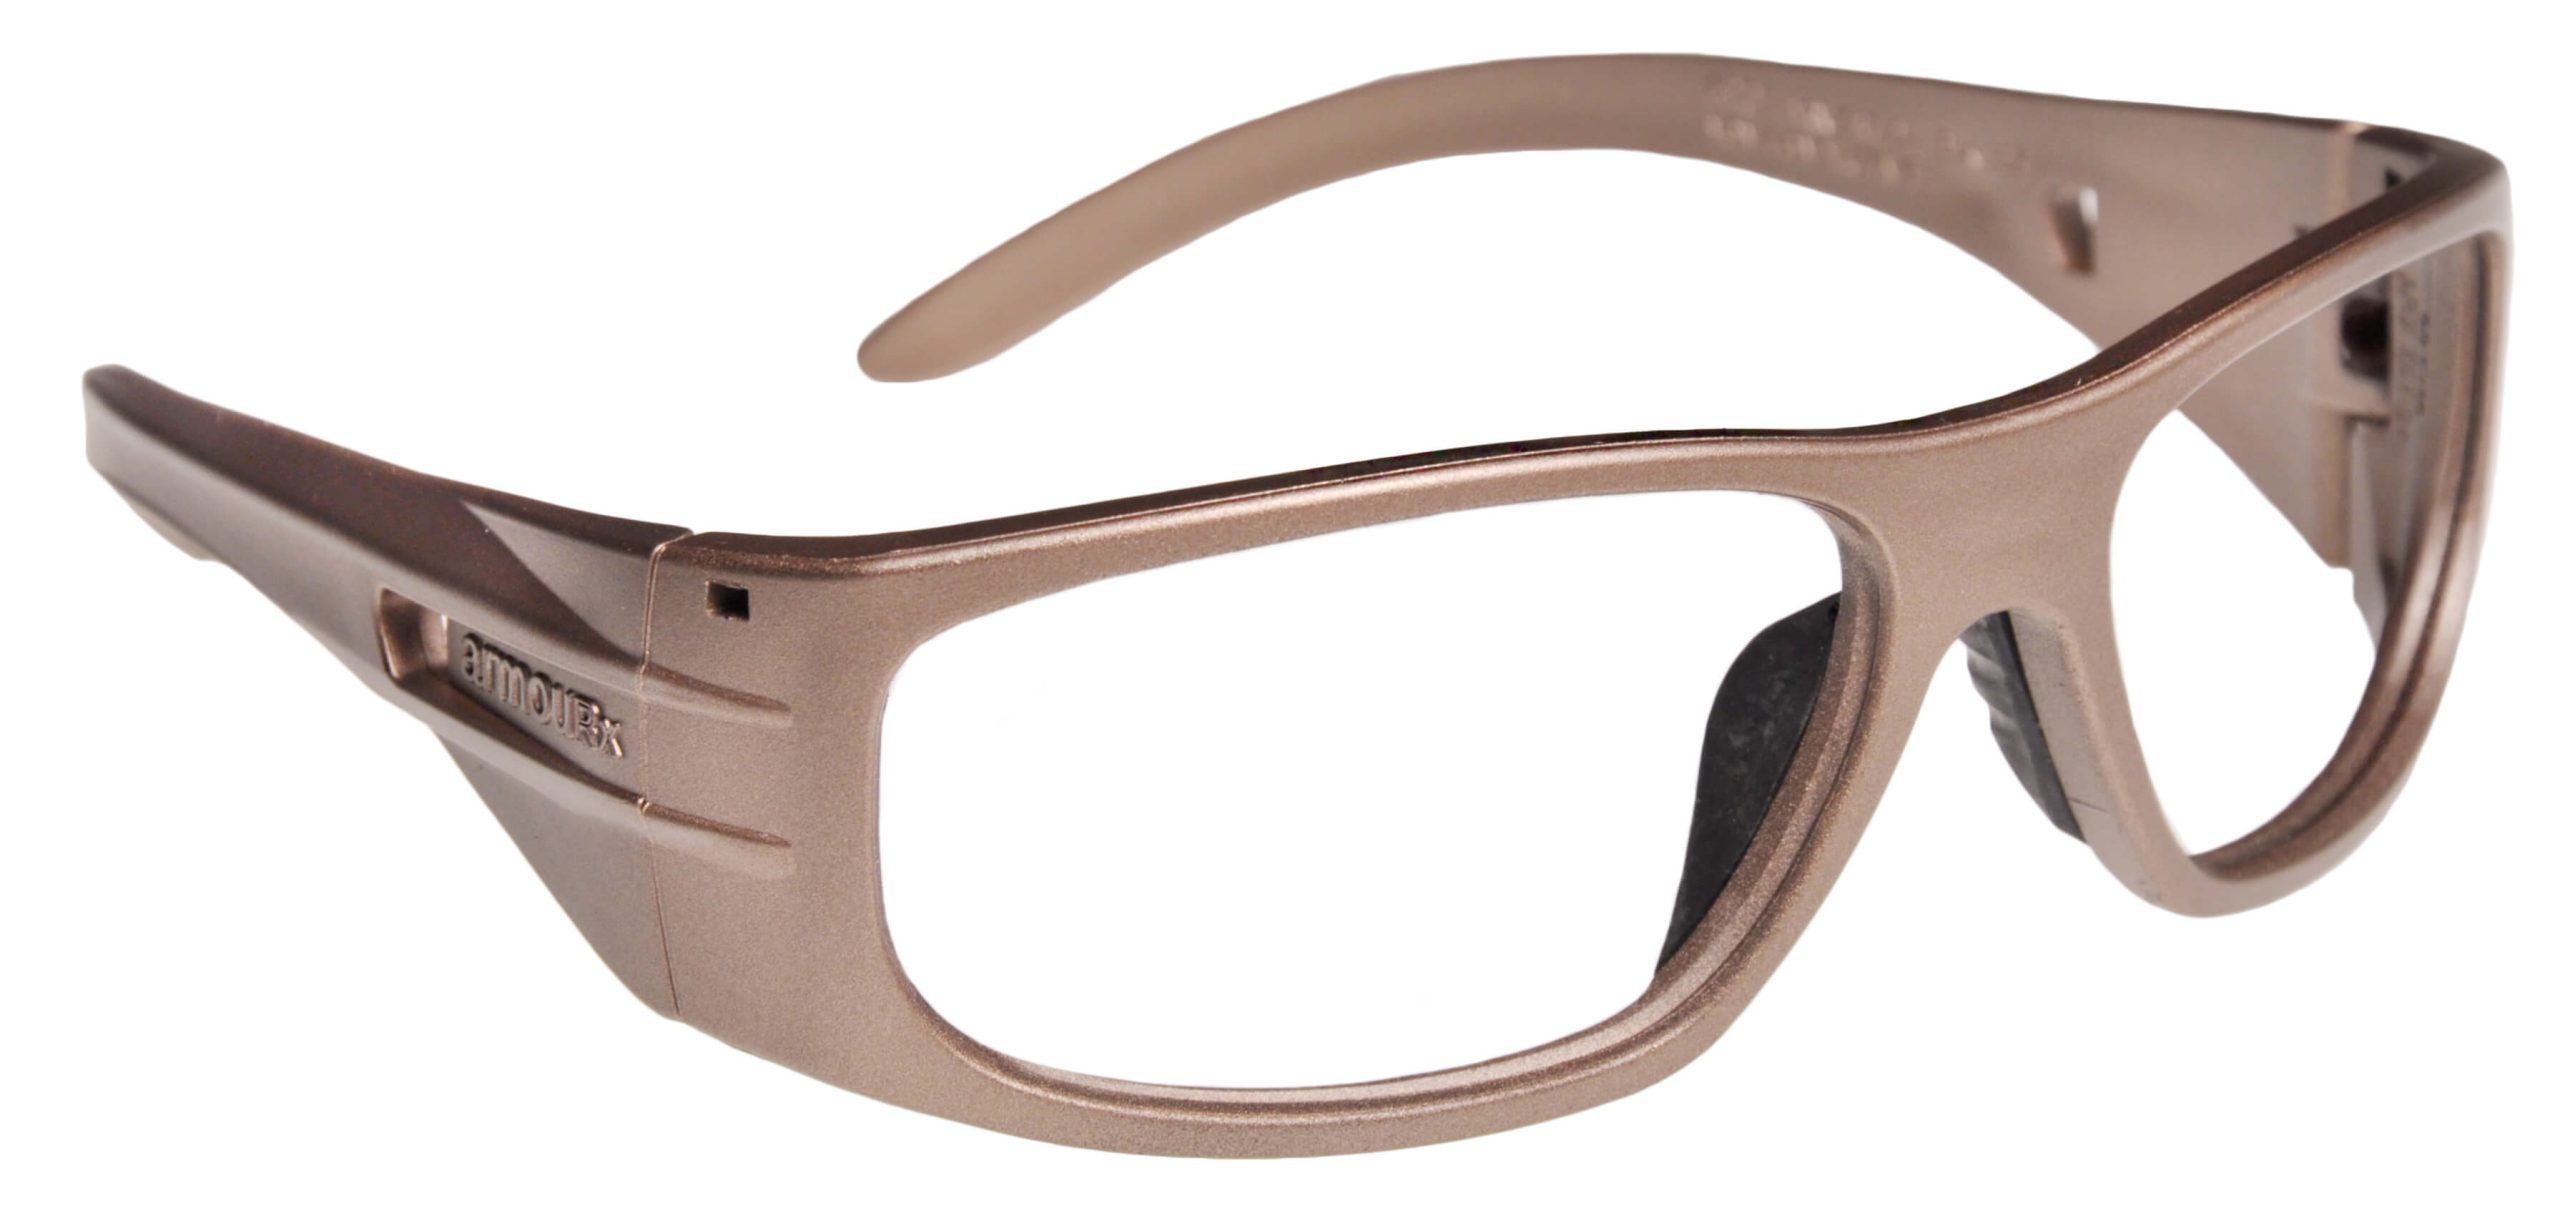 Safety glasses frames WRAP-RX COLLECTION: MODEL 6001 in Brown